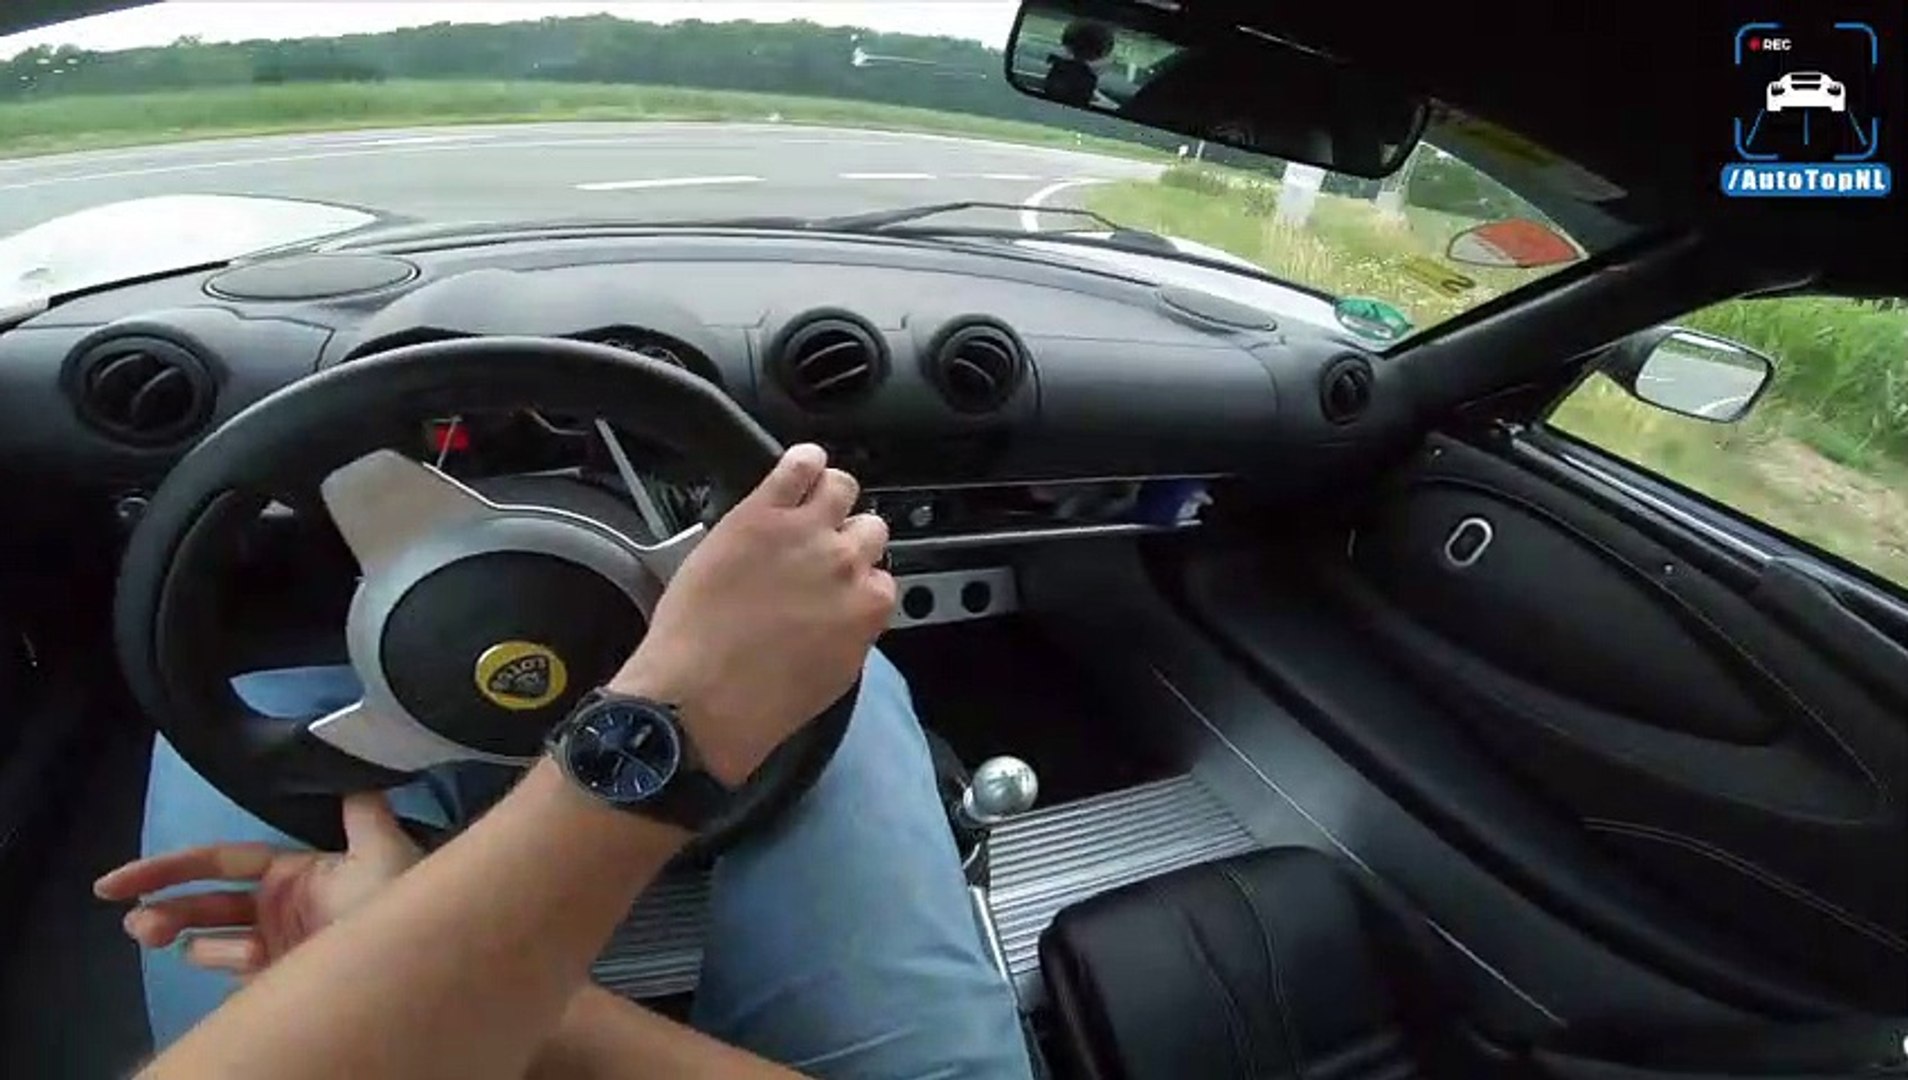 460HP LOTUS EXIGE S 3.5 V6 SUPERCHARGED POV Test Drive by AutoTopNL